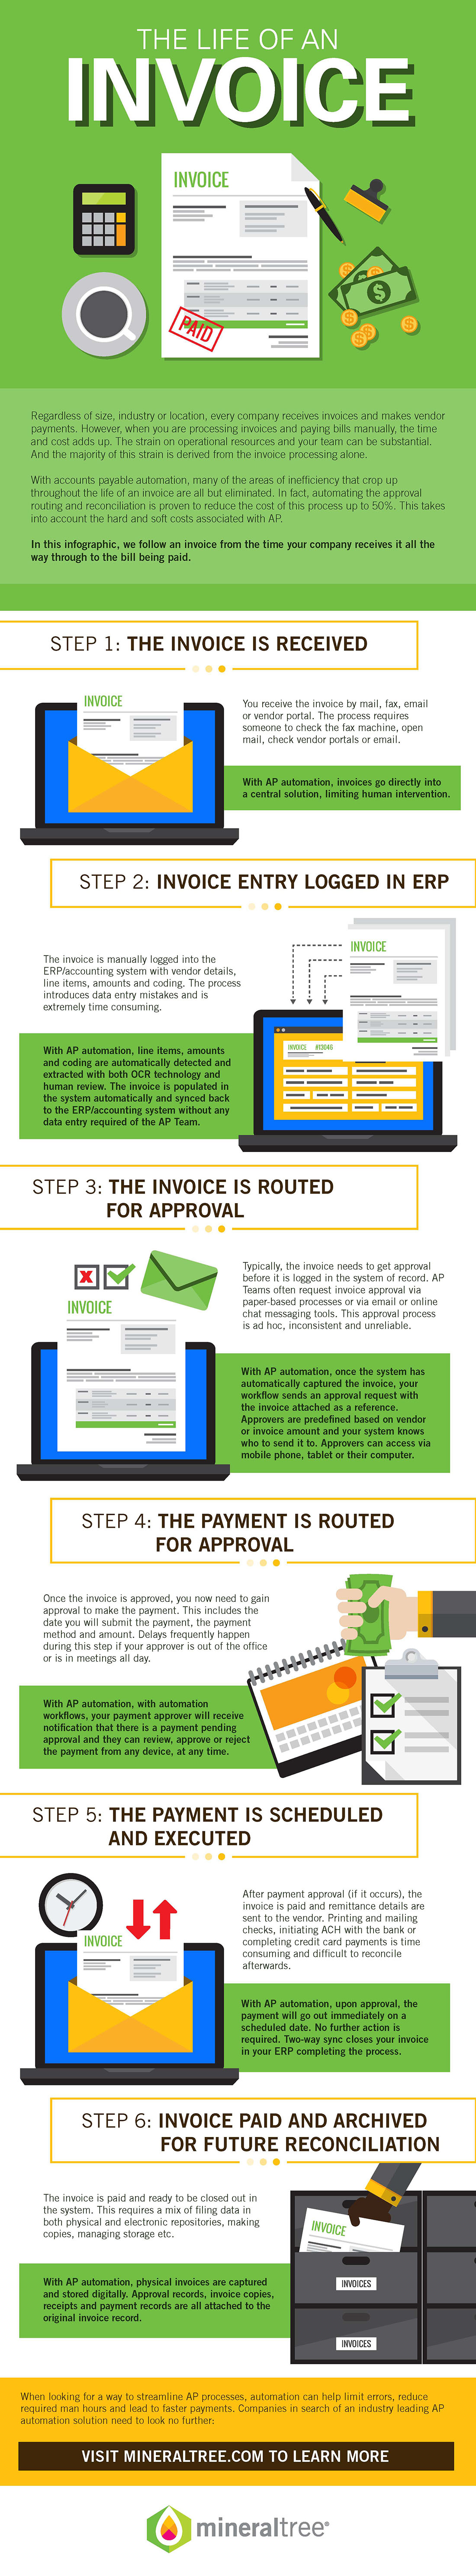 Life of an Invoice Infographic